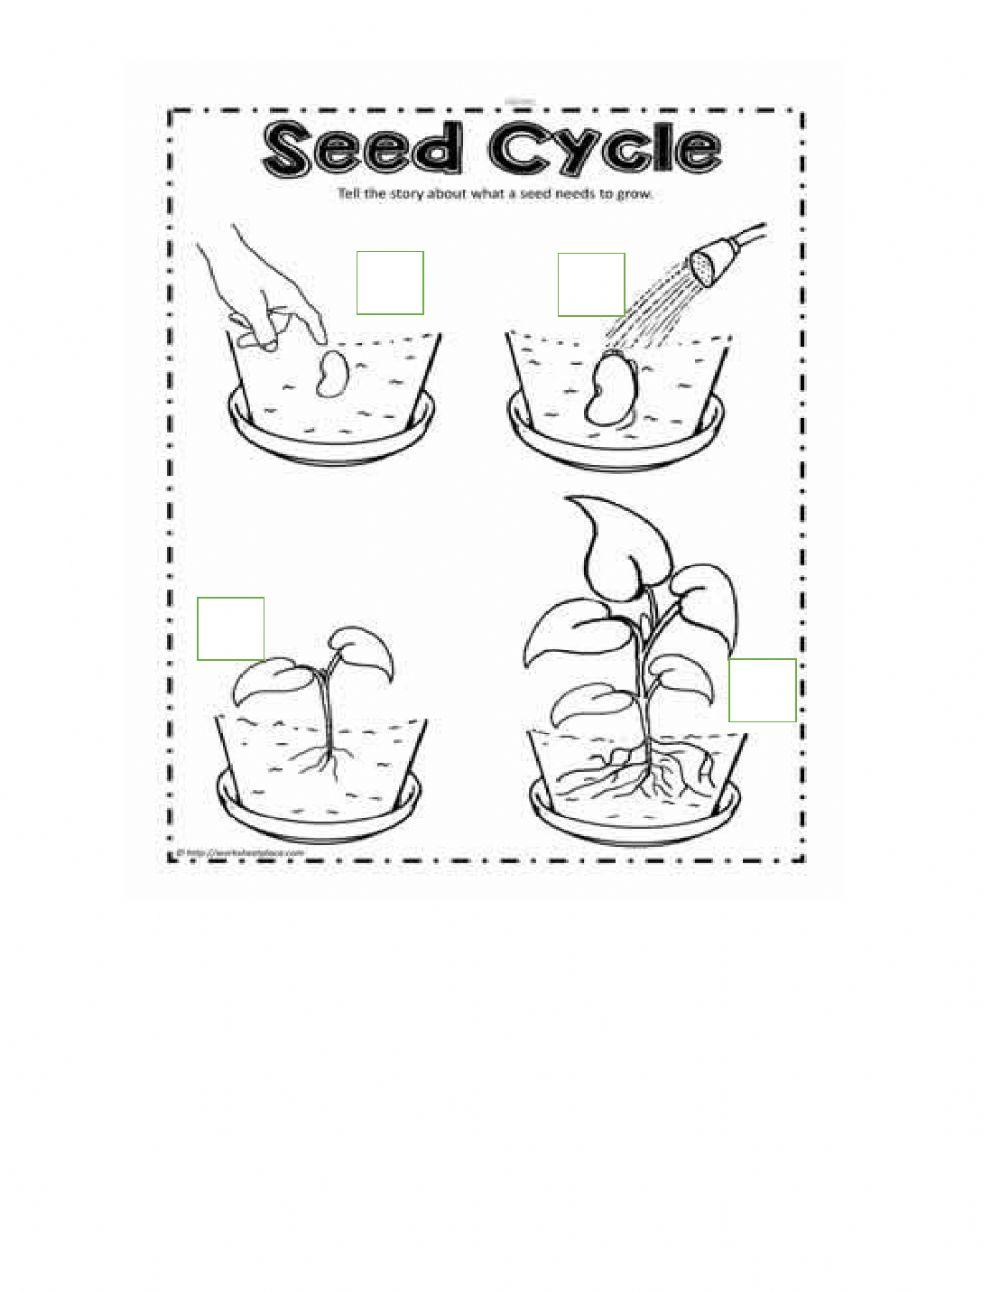 Cycle of plants